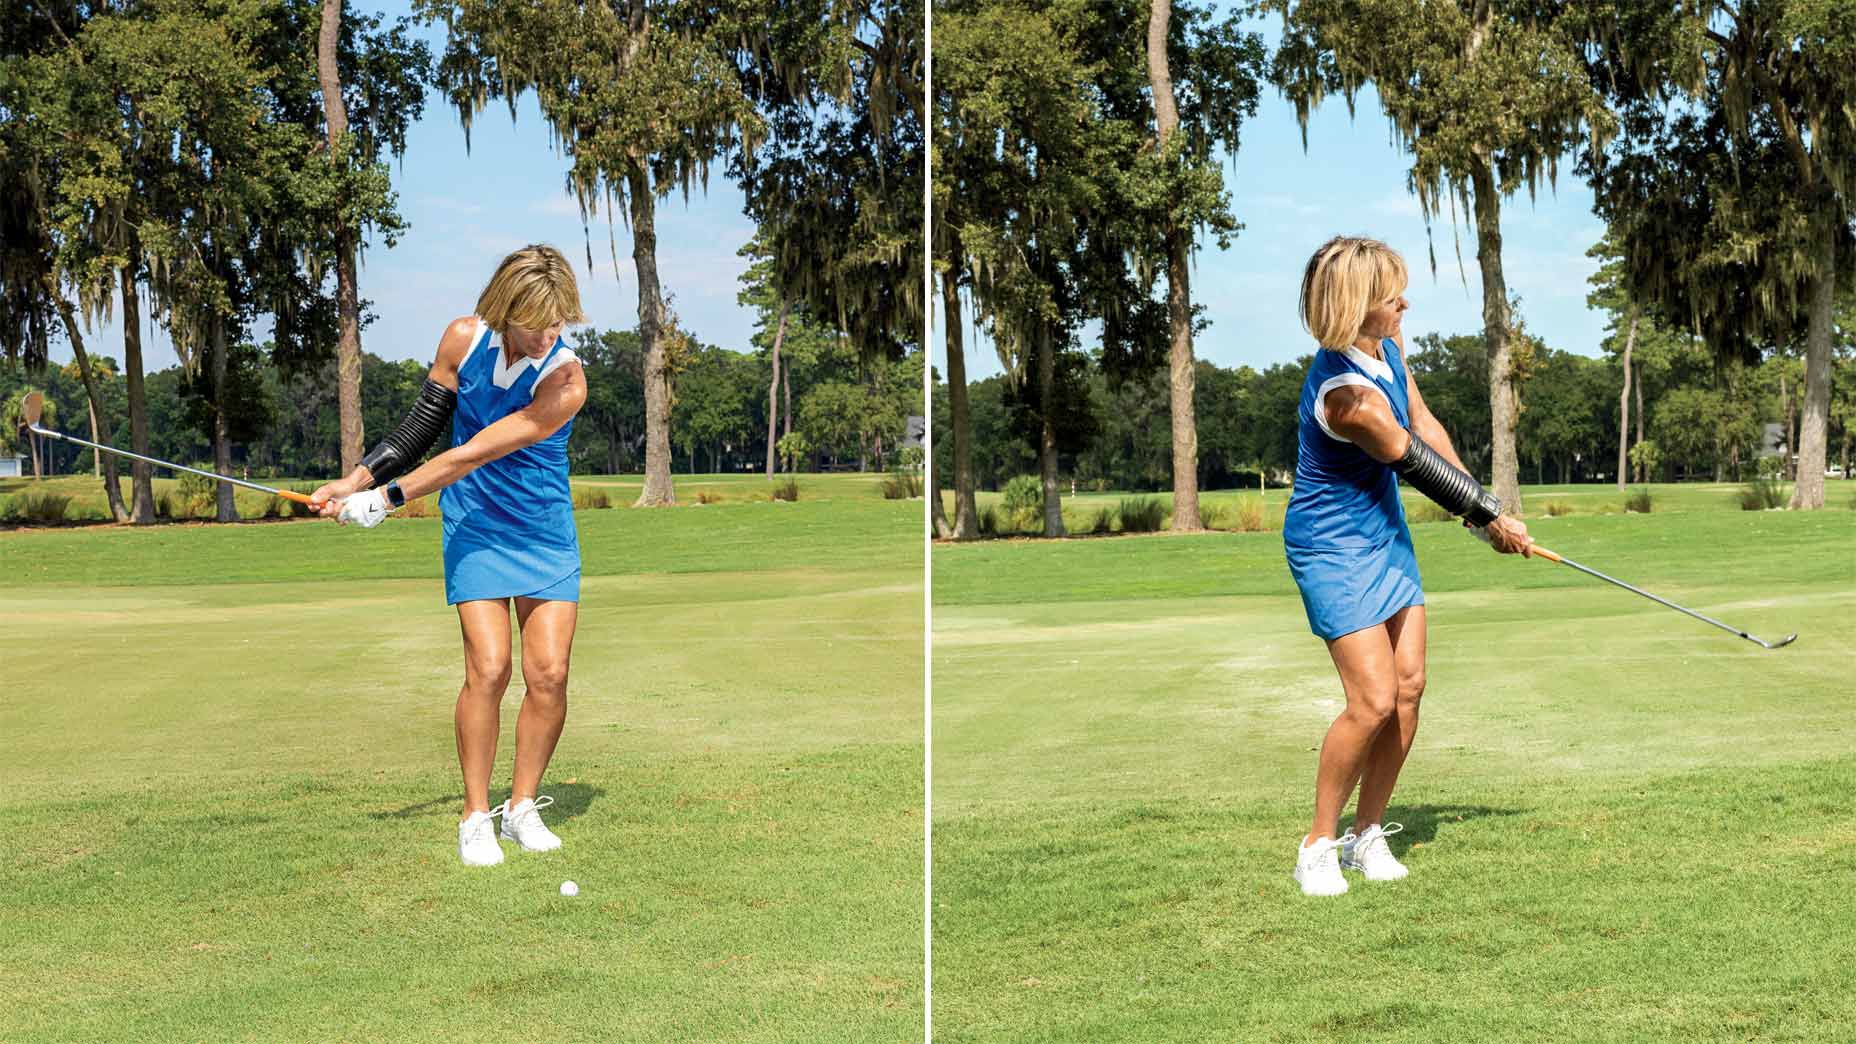 krista dunton shows how to hit pitch shots with a straight arm